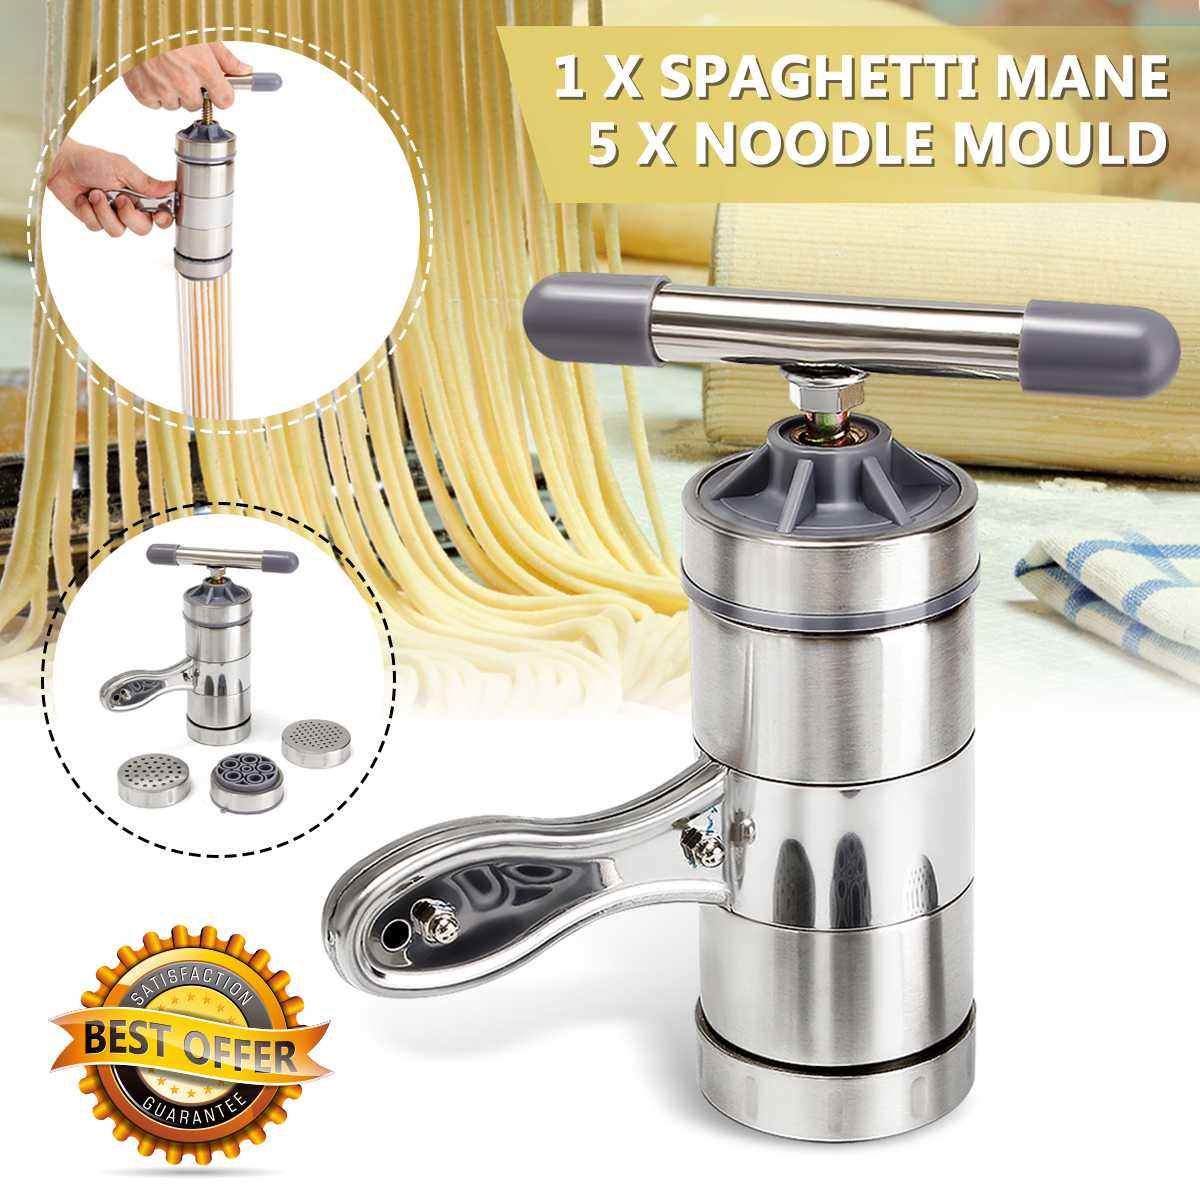 Stainless Steel Noodle Maker For Home Use, Manual Pasta Maker